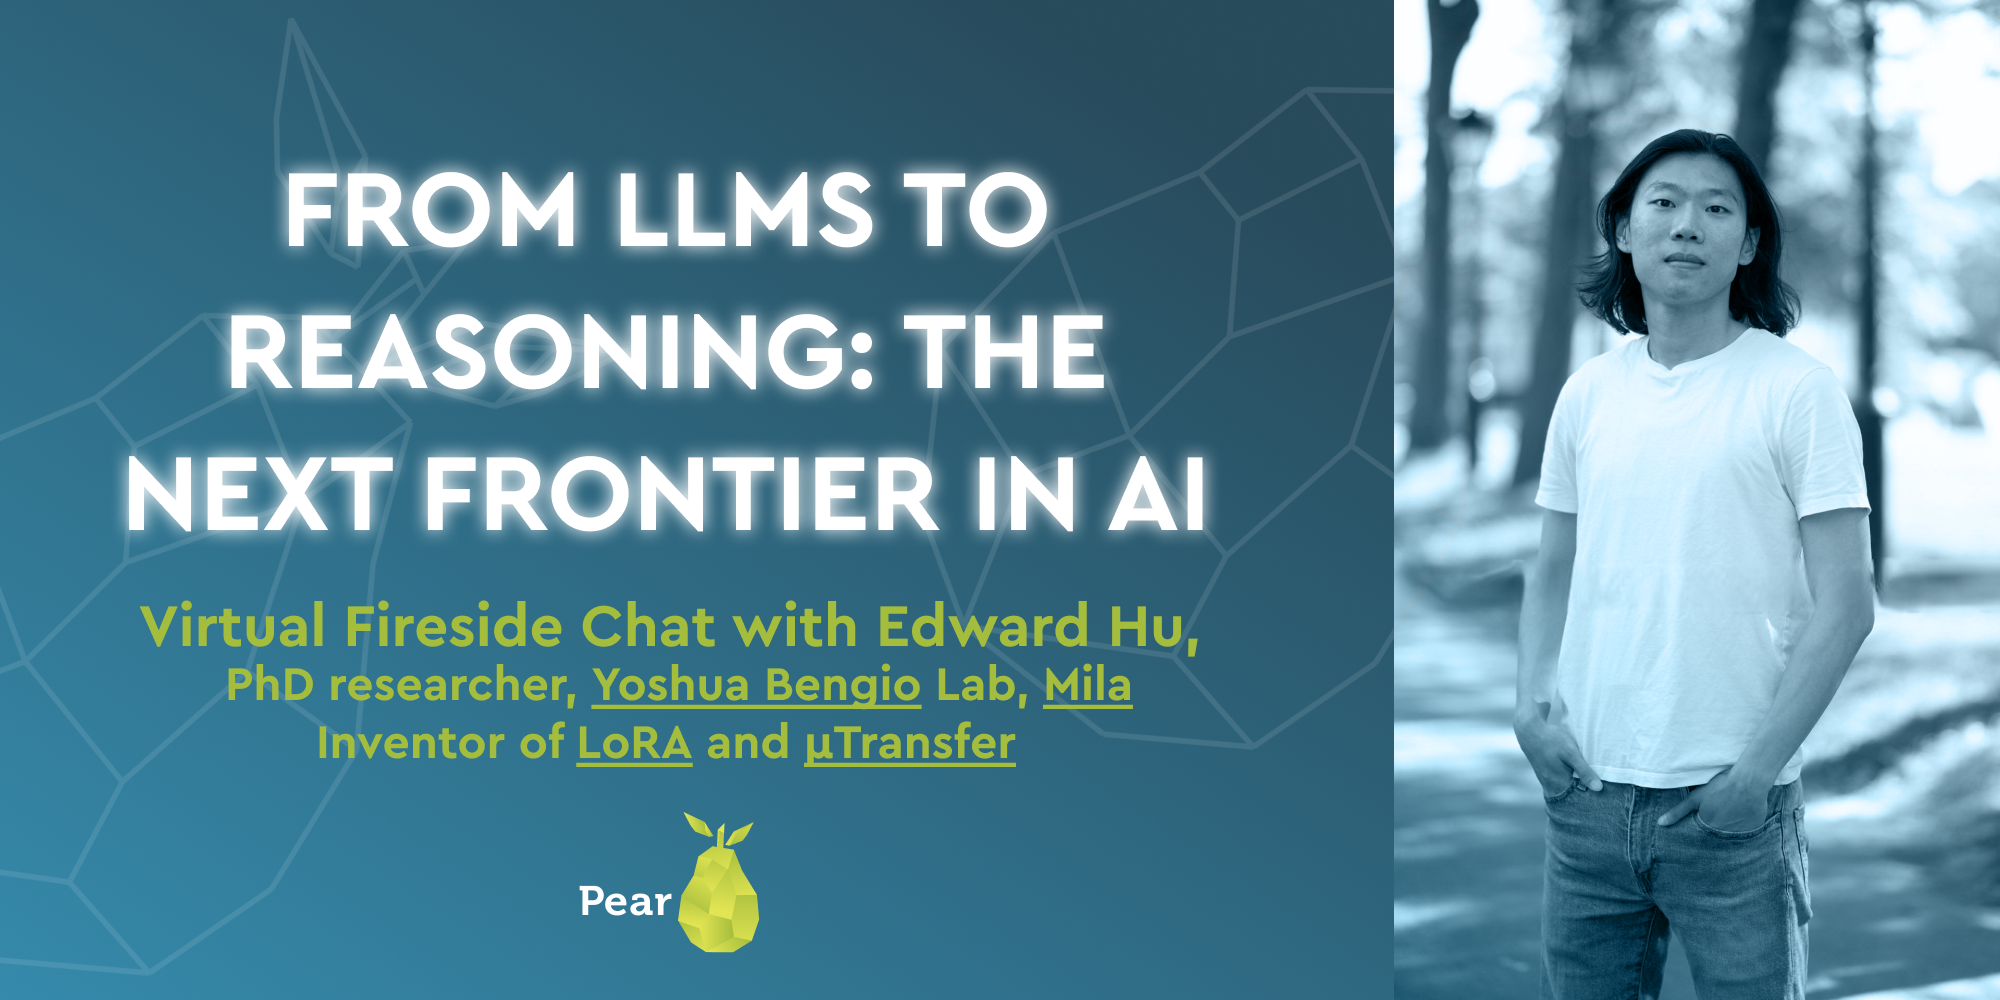 event From LLMs to Reasoning: The Next Frontier in AI with Edward Hu